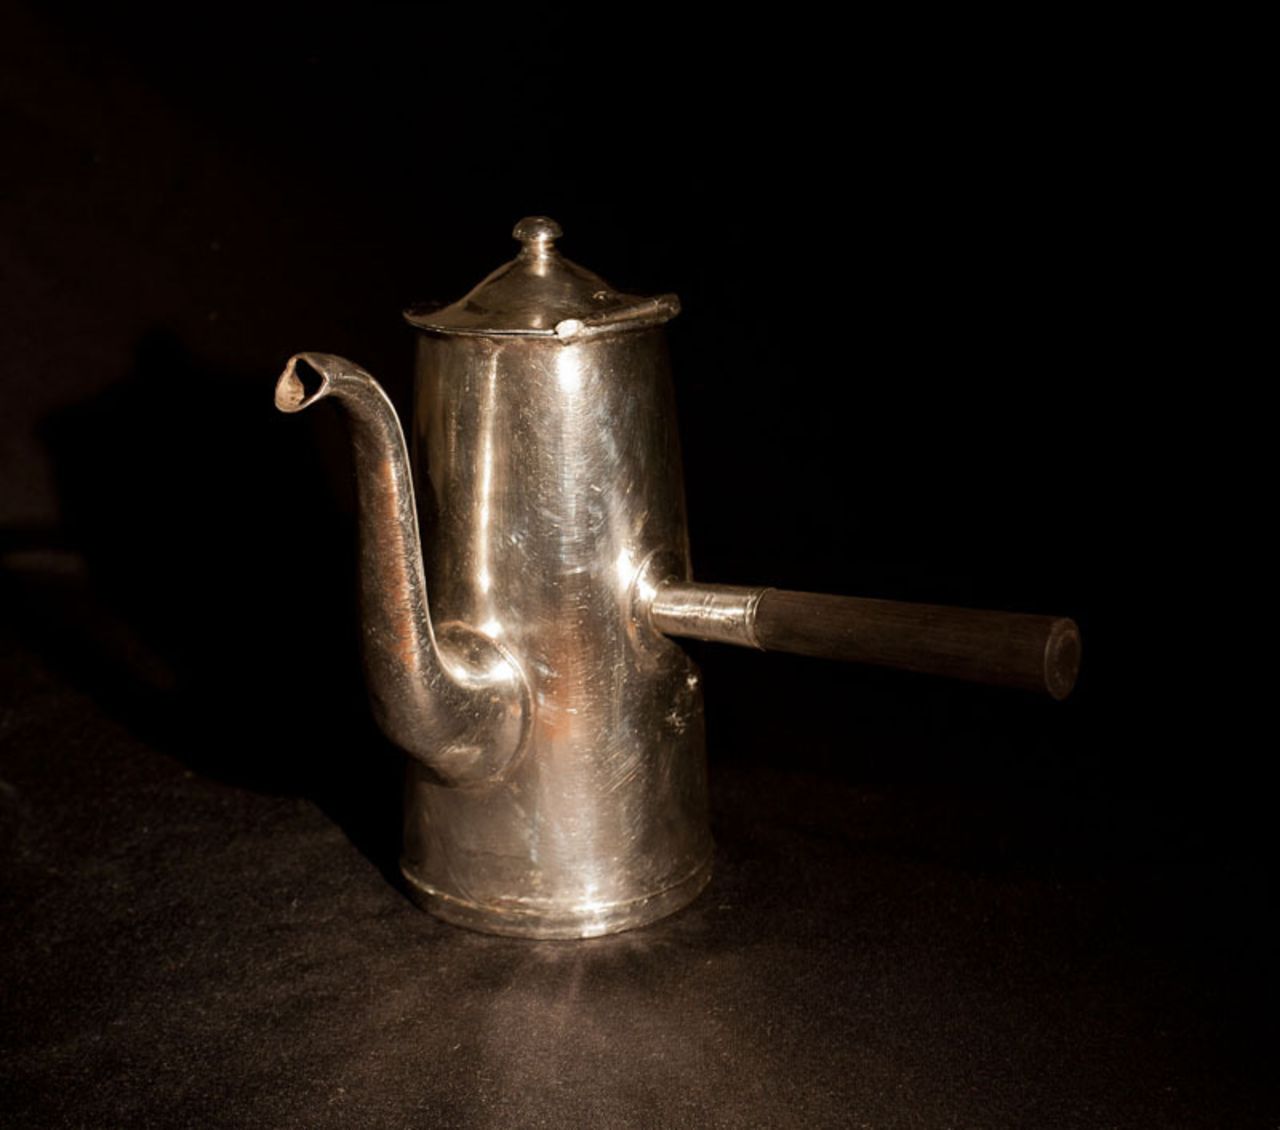 This unusual looking coffee pot is believed to have been taken by a newly married couple in the throes of their 1938 honeymoon. Having been passed down through the generations of family since, the item was returned by relatives in 2012.